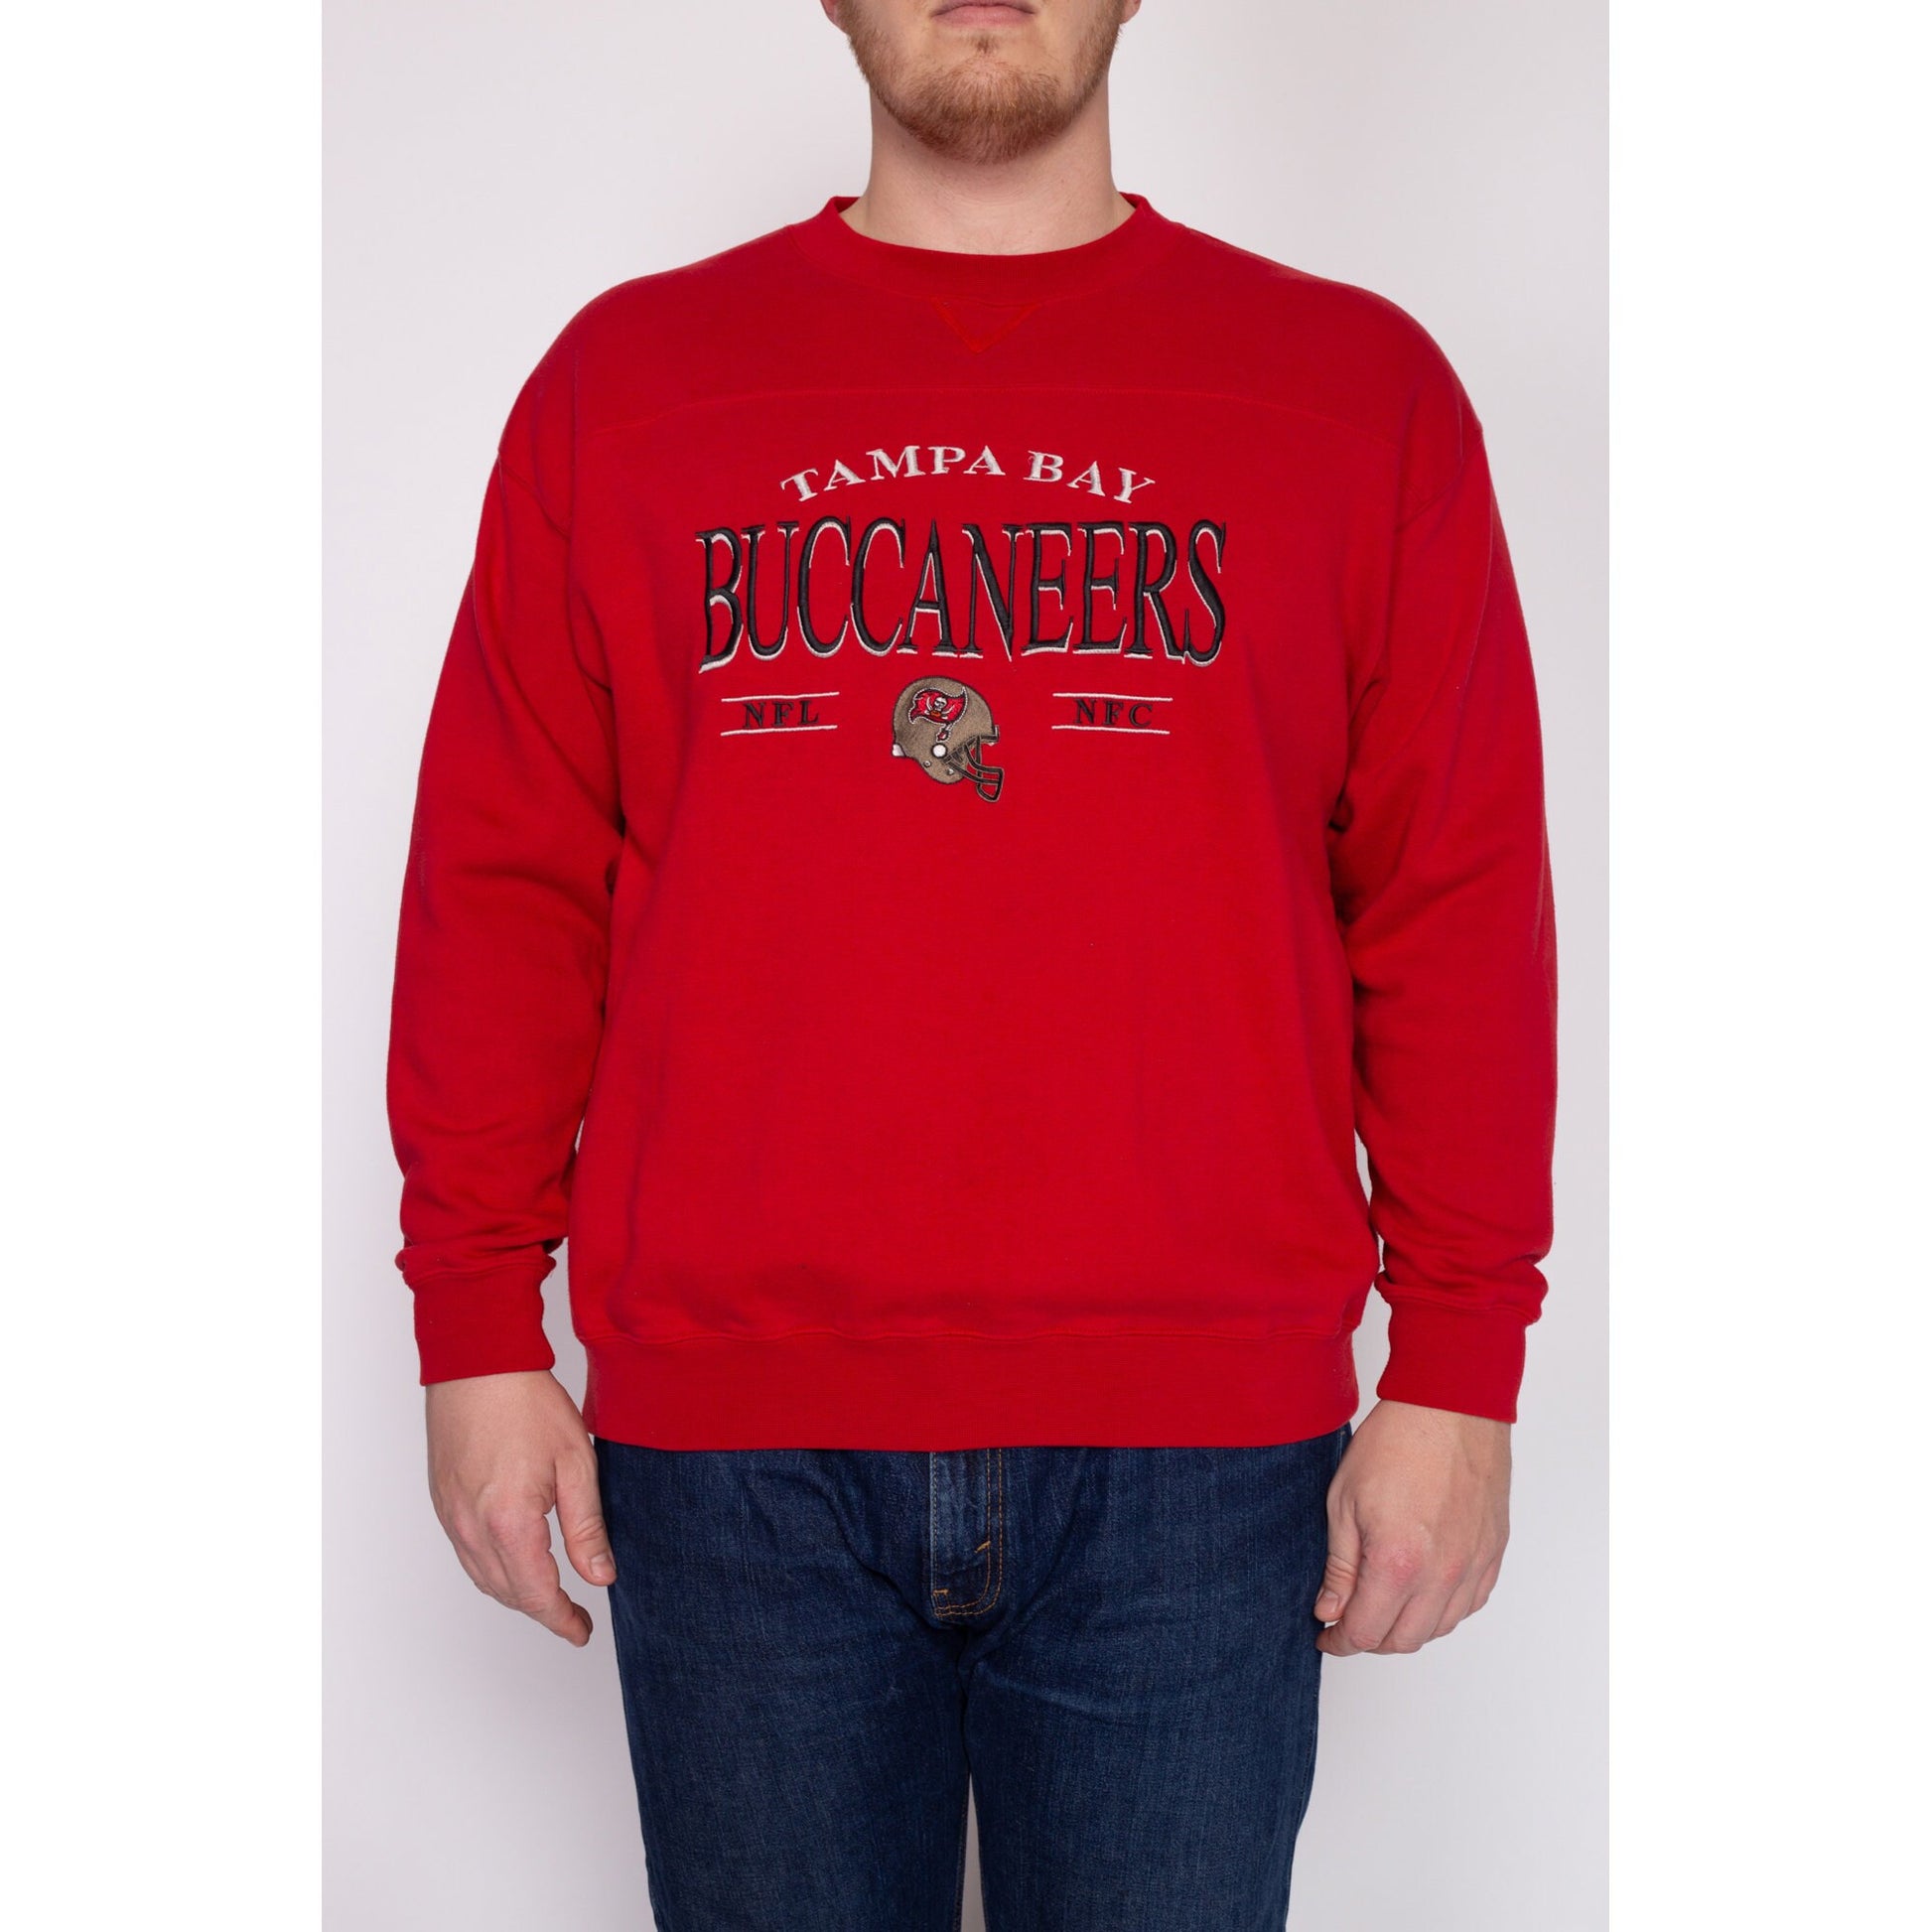 Official tampa bay buccaneers vintage embroidered shirt, hoodie, sweater,  long sleeve and tank top